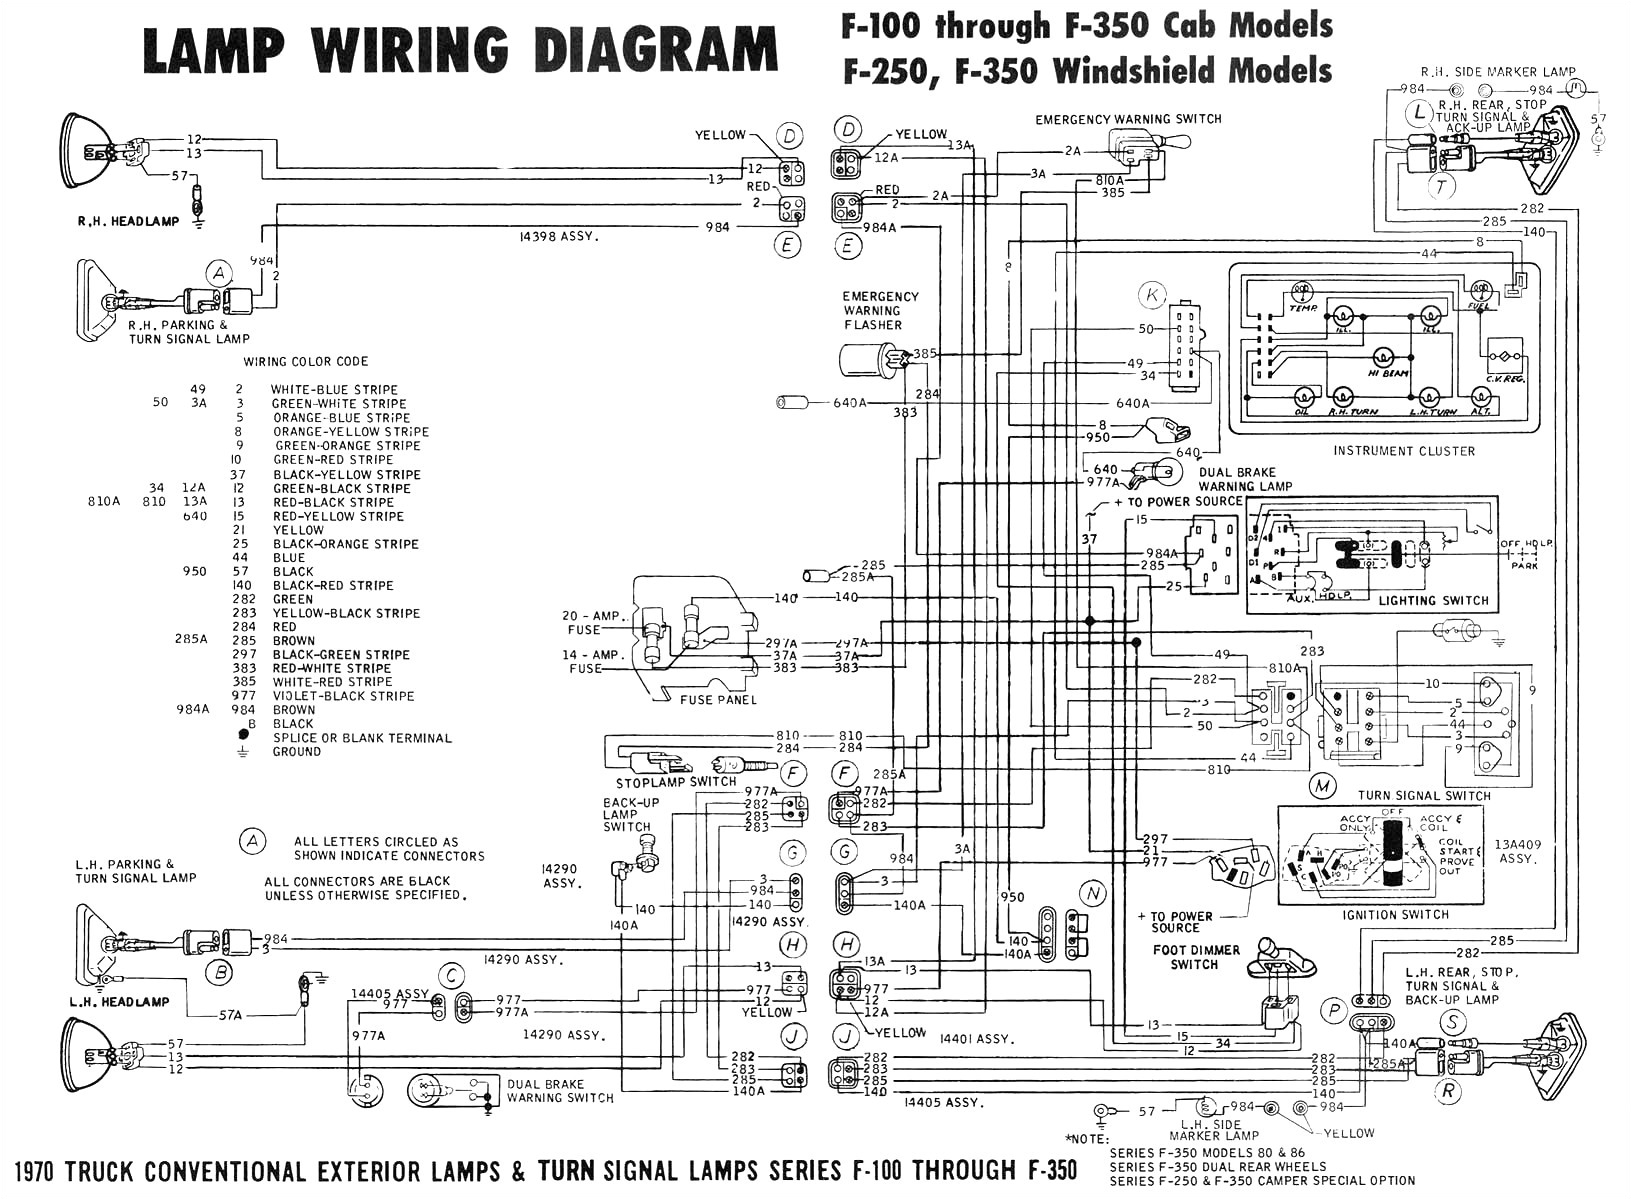 2004 f350 wiring harness free download wiring diagram files 1983 ford f 350 wiring harness free